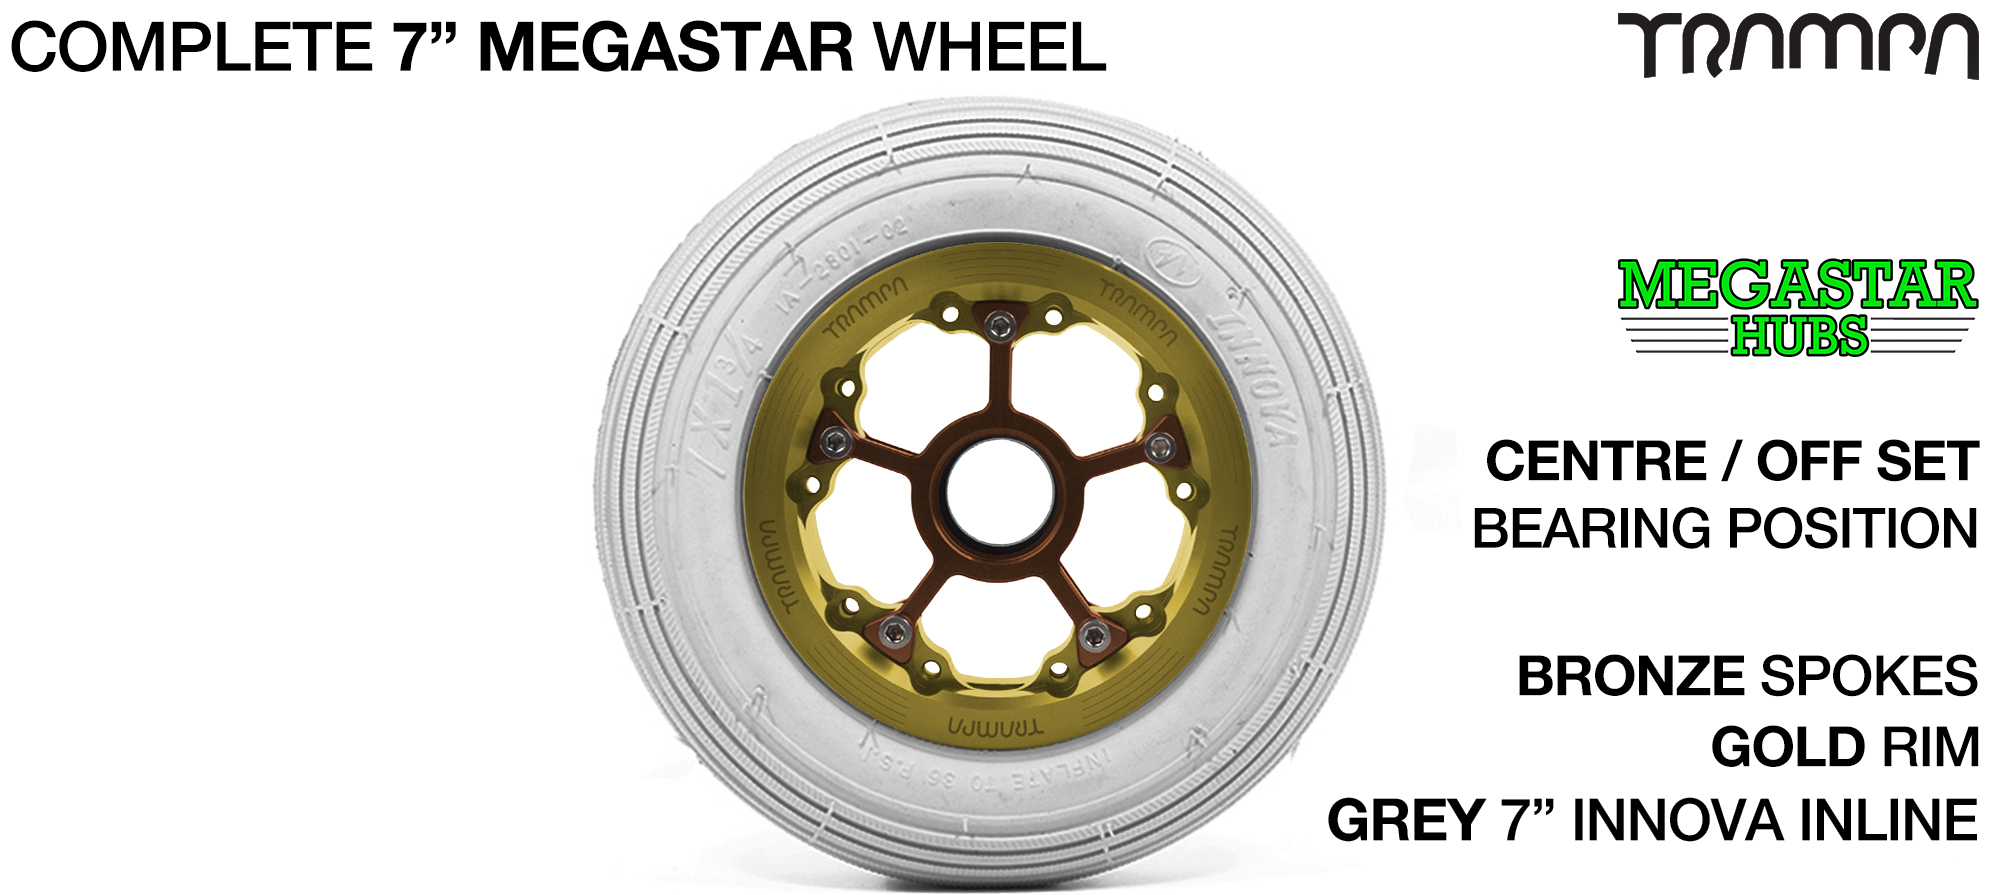 GOLD MEGASTAR Rims with BRONZE Spokes & 7 Inch Tyres